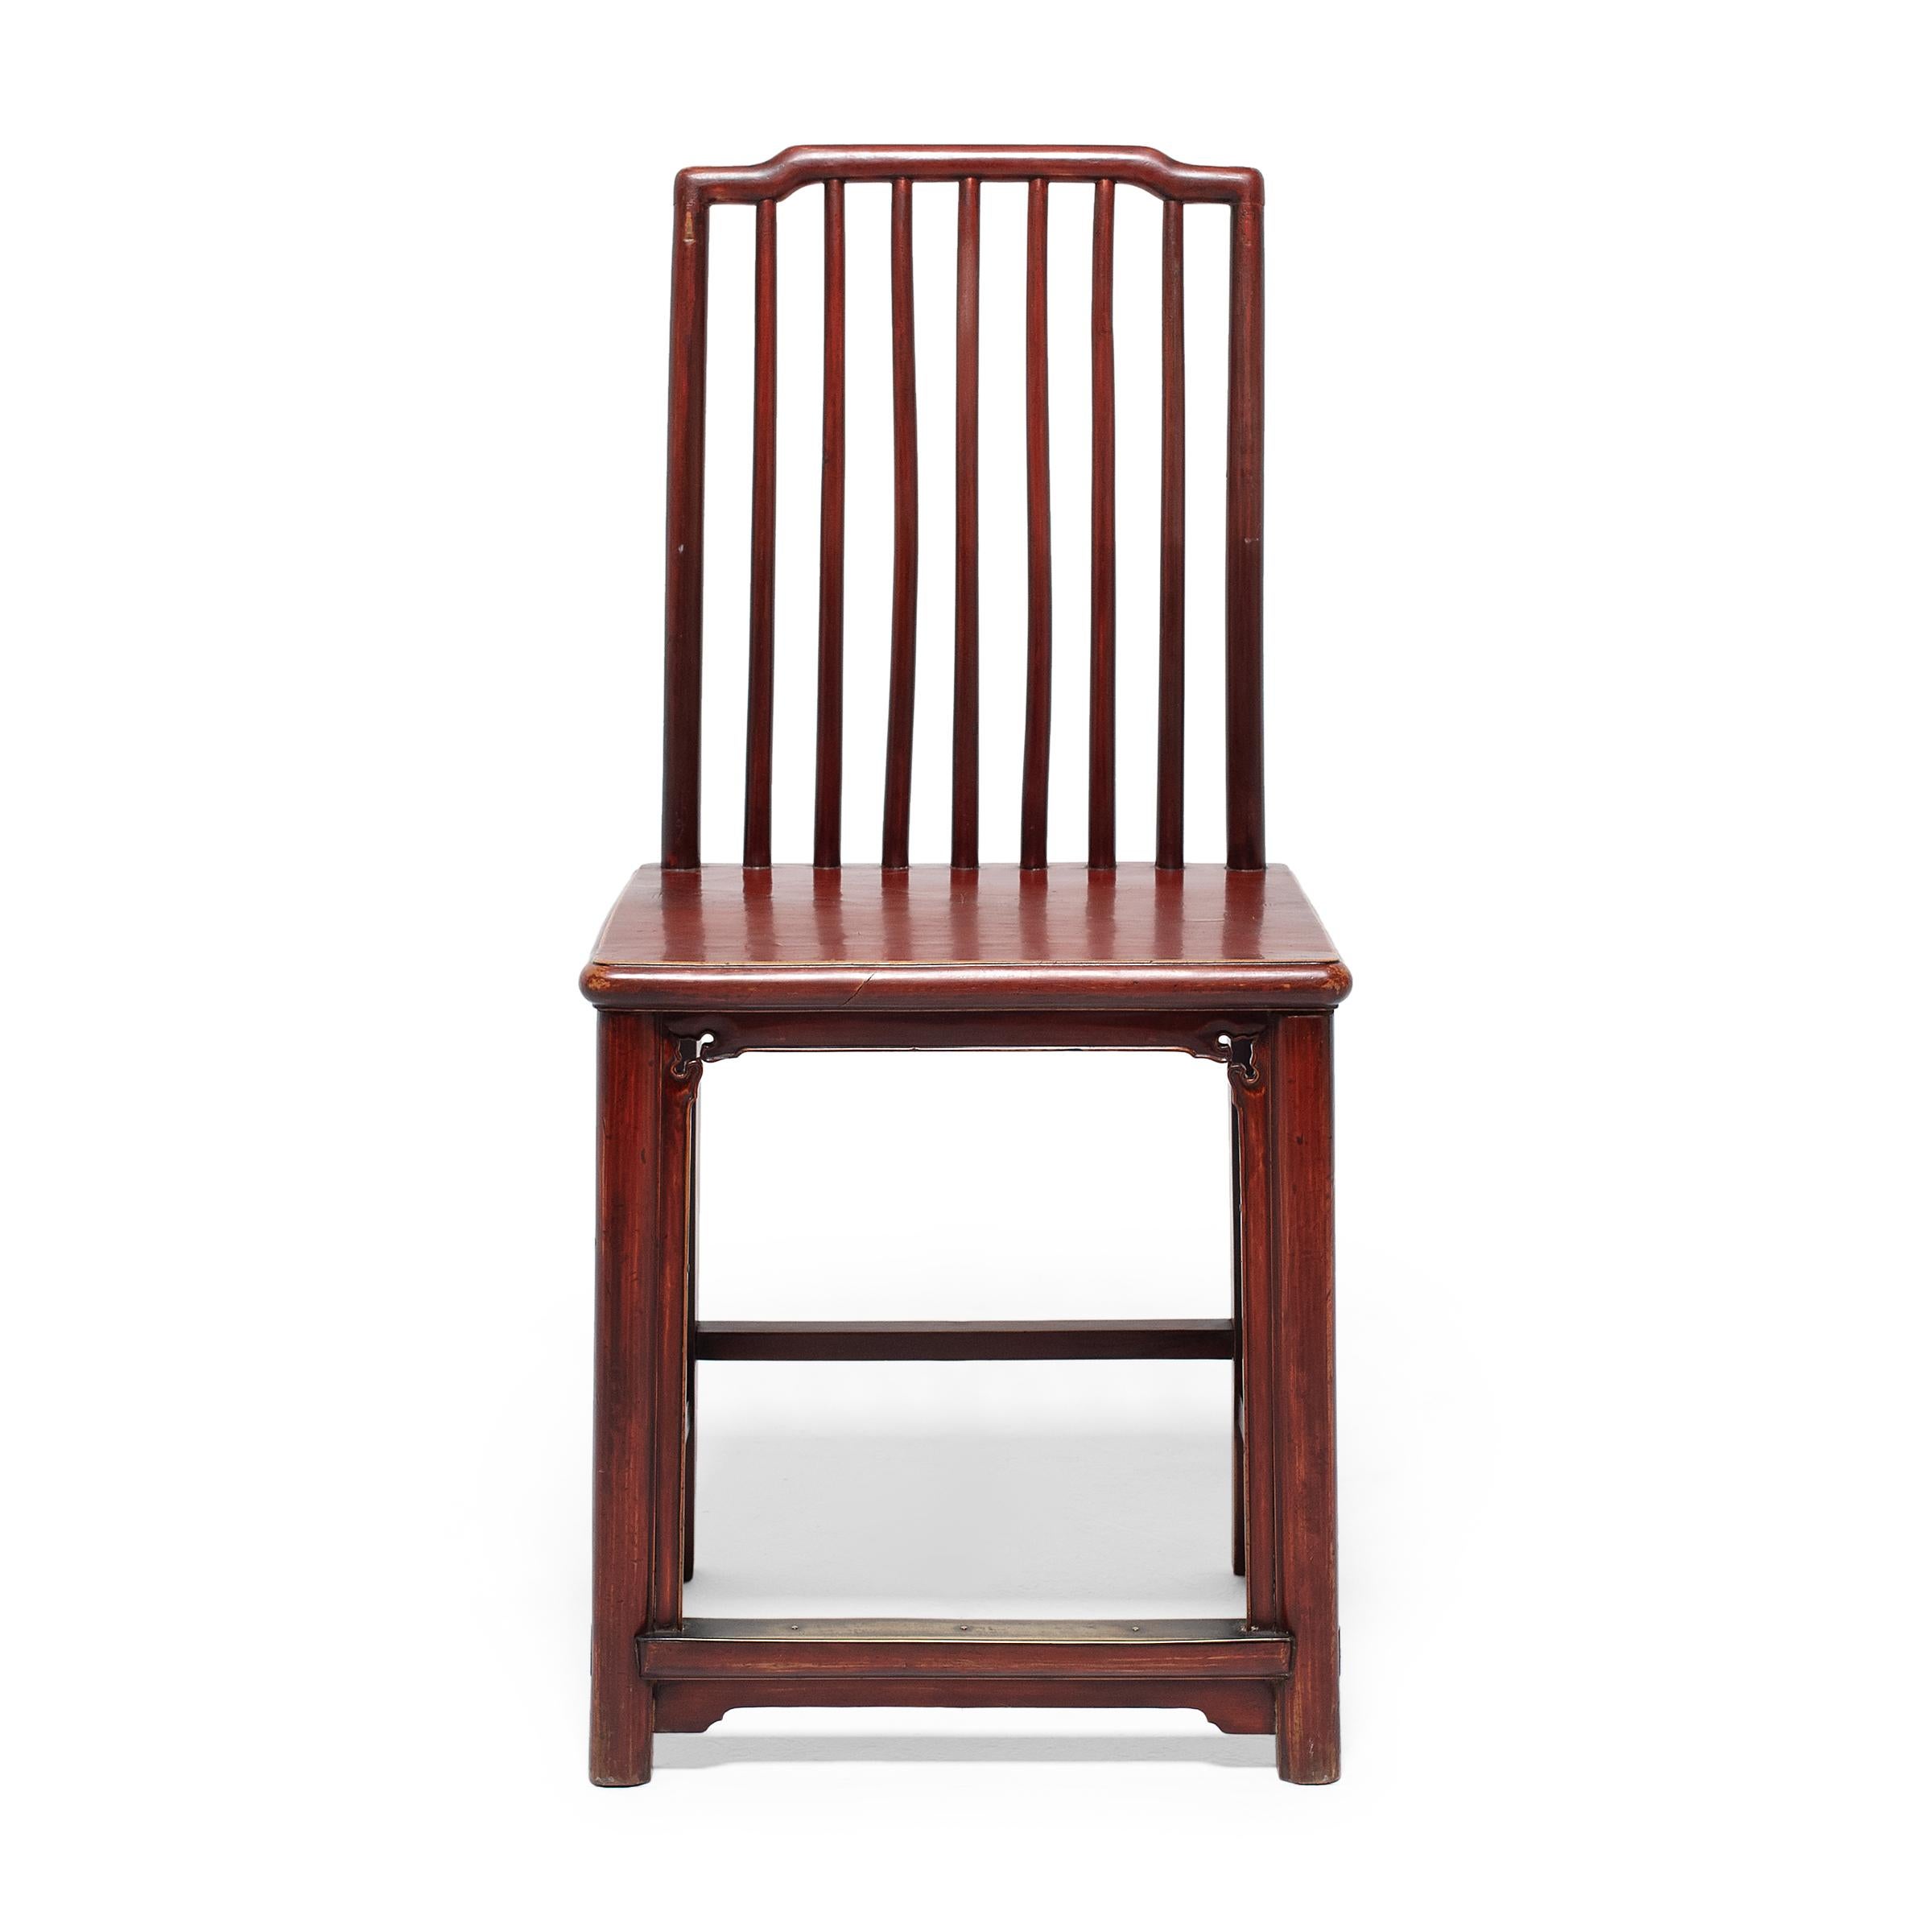 These 19th-century elmwood chairs owe their graceful design to the refined styles and carpentry techniques that emerged during the Ming dynasty, the golden age of Chinese furniture design. The chairs feature square seats, corner legs linked by